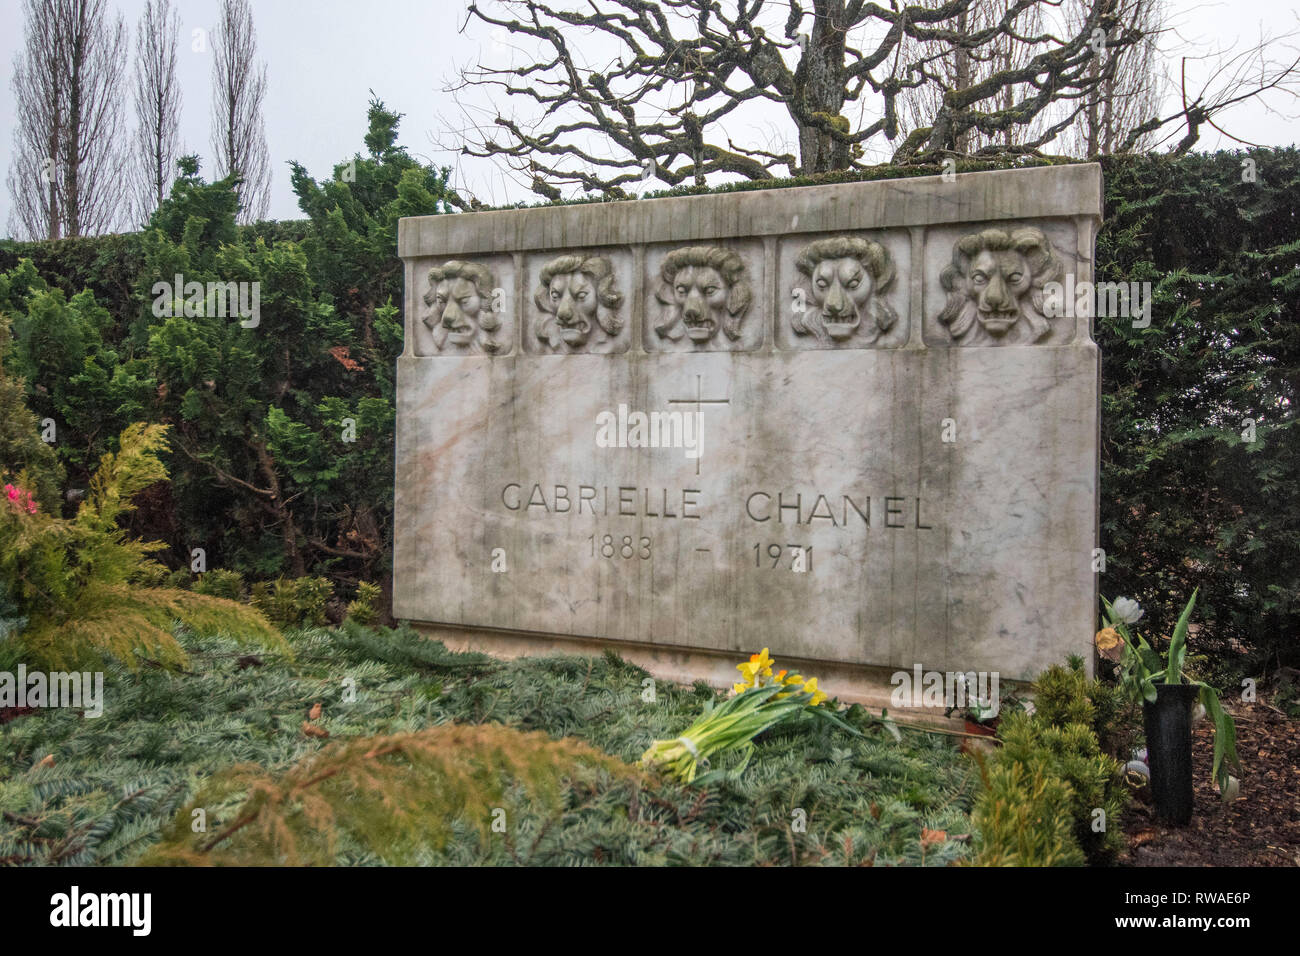 Gabrielle Bonheur Coco Chanel - The graves of the famous